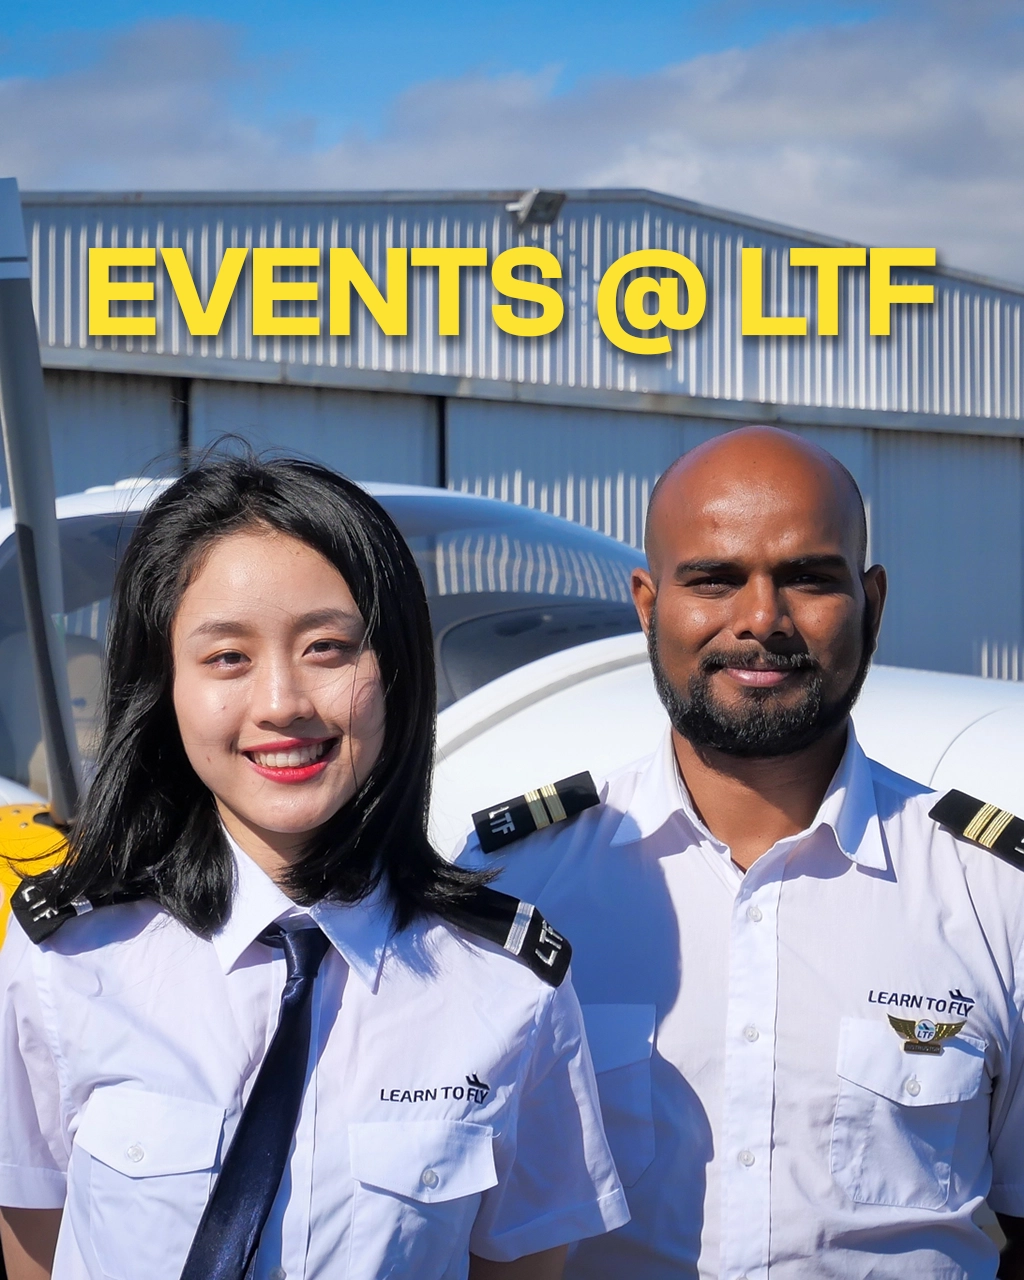 Upcoming Learn To Fly Events